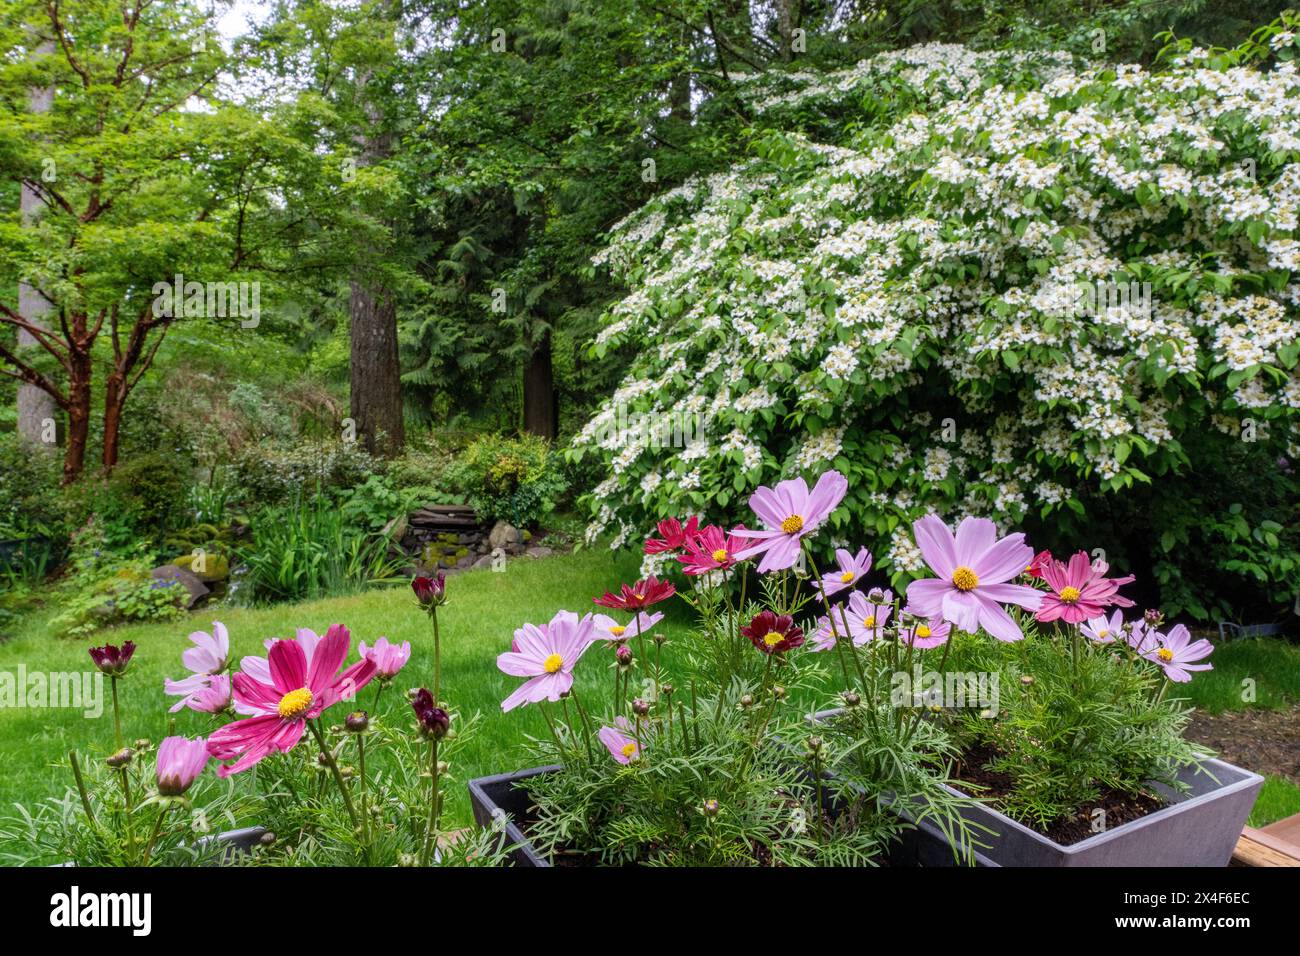 Issaquah, Washington State, USA. Cosmos flowers in pots in foreground and doublefile viburnum shrub in bloom in the background. Stock Photo